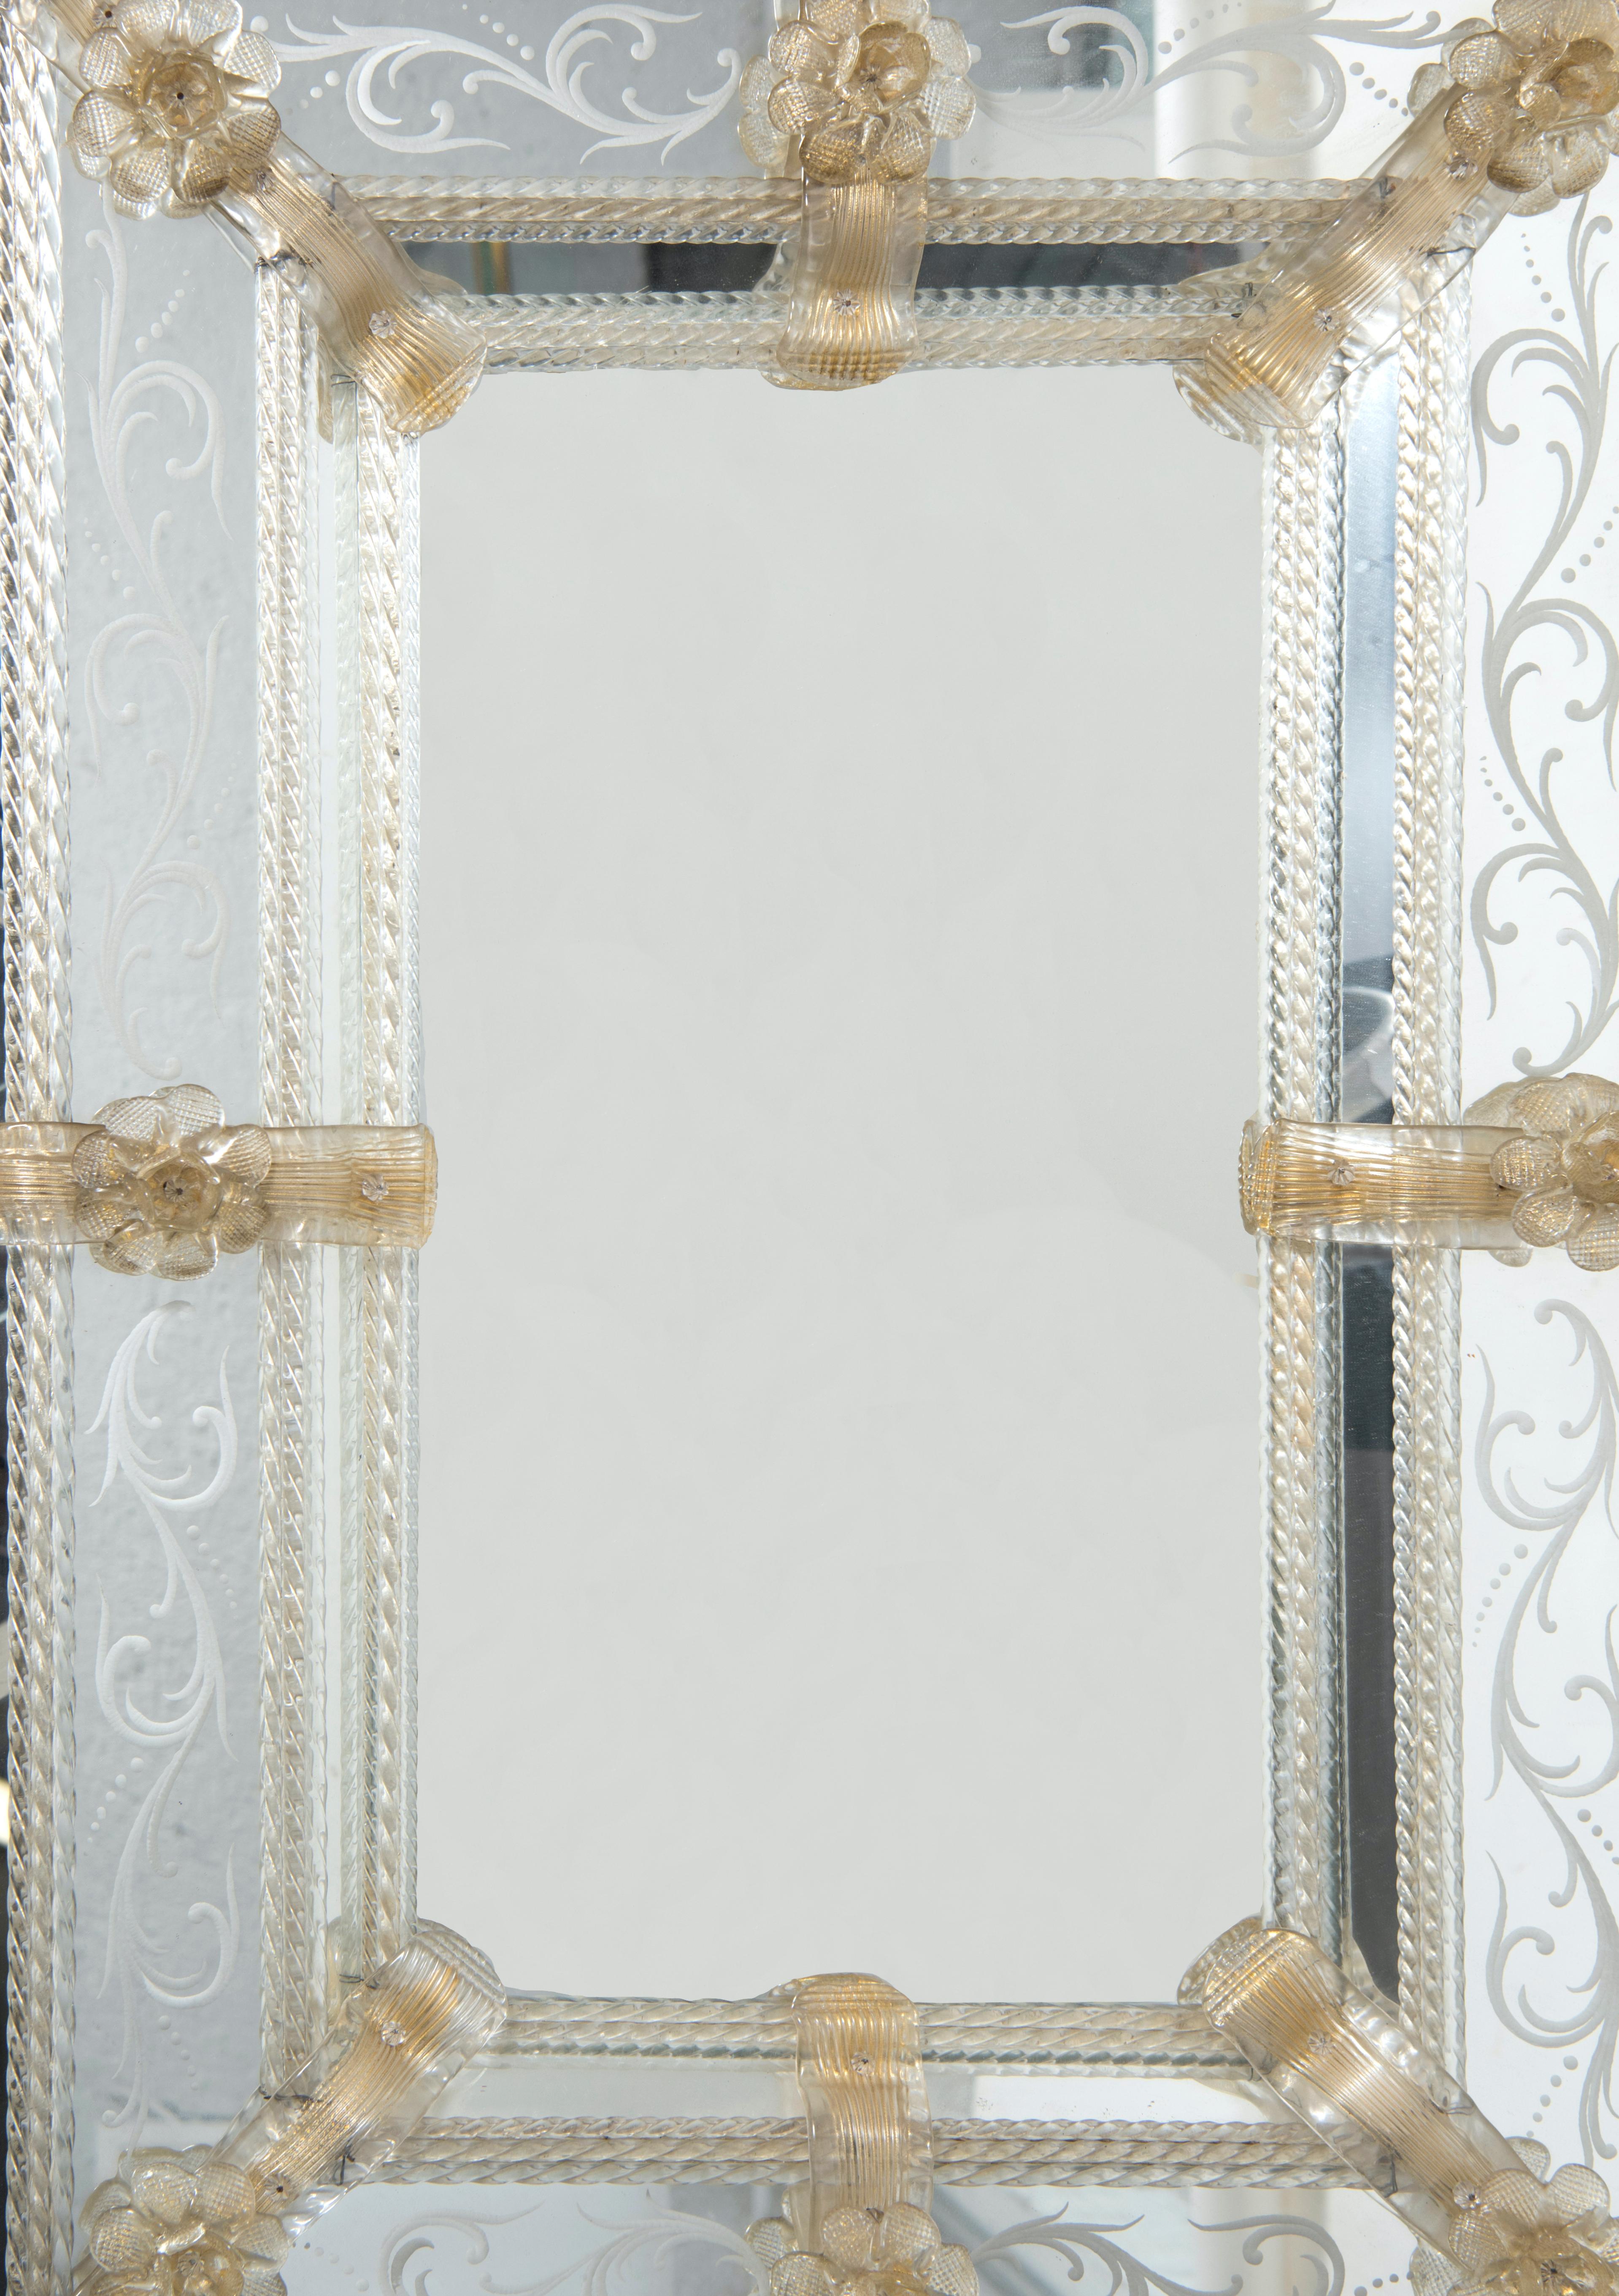 Murano glass mirror is an original Murano glass mirror realized in Murano (Italy) during the first quarter of the 20th century.

This elegant rectangular Murano glass mirror has engraved floral decorations and glass applications with golden